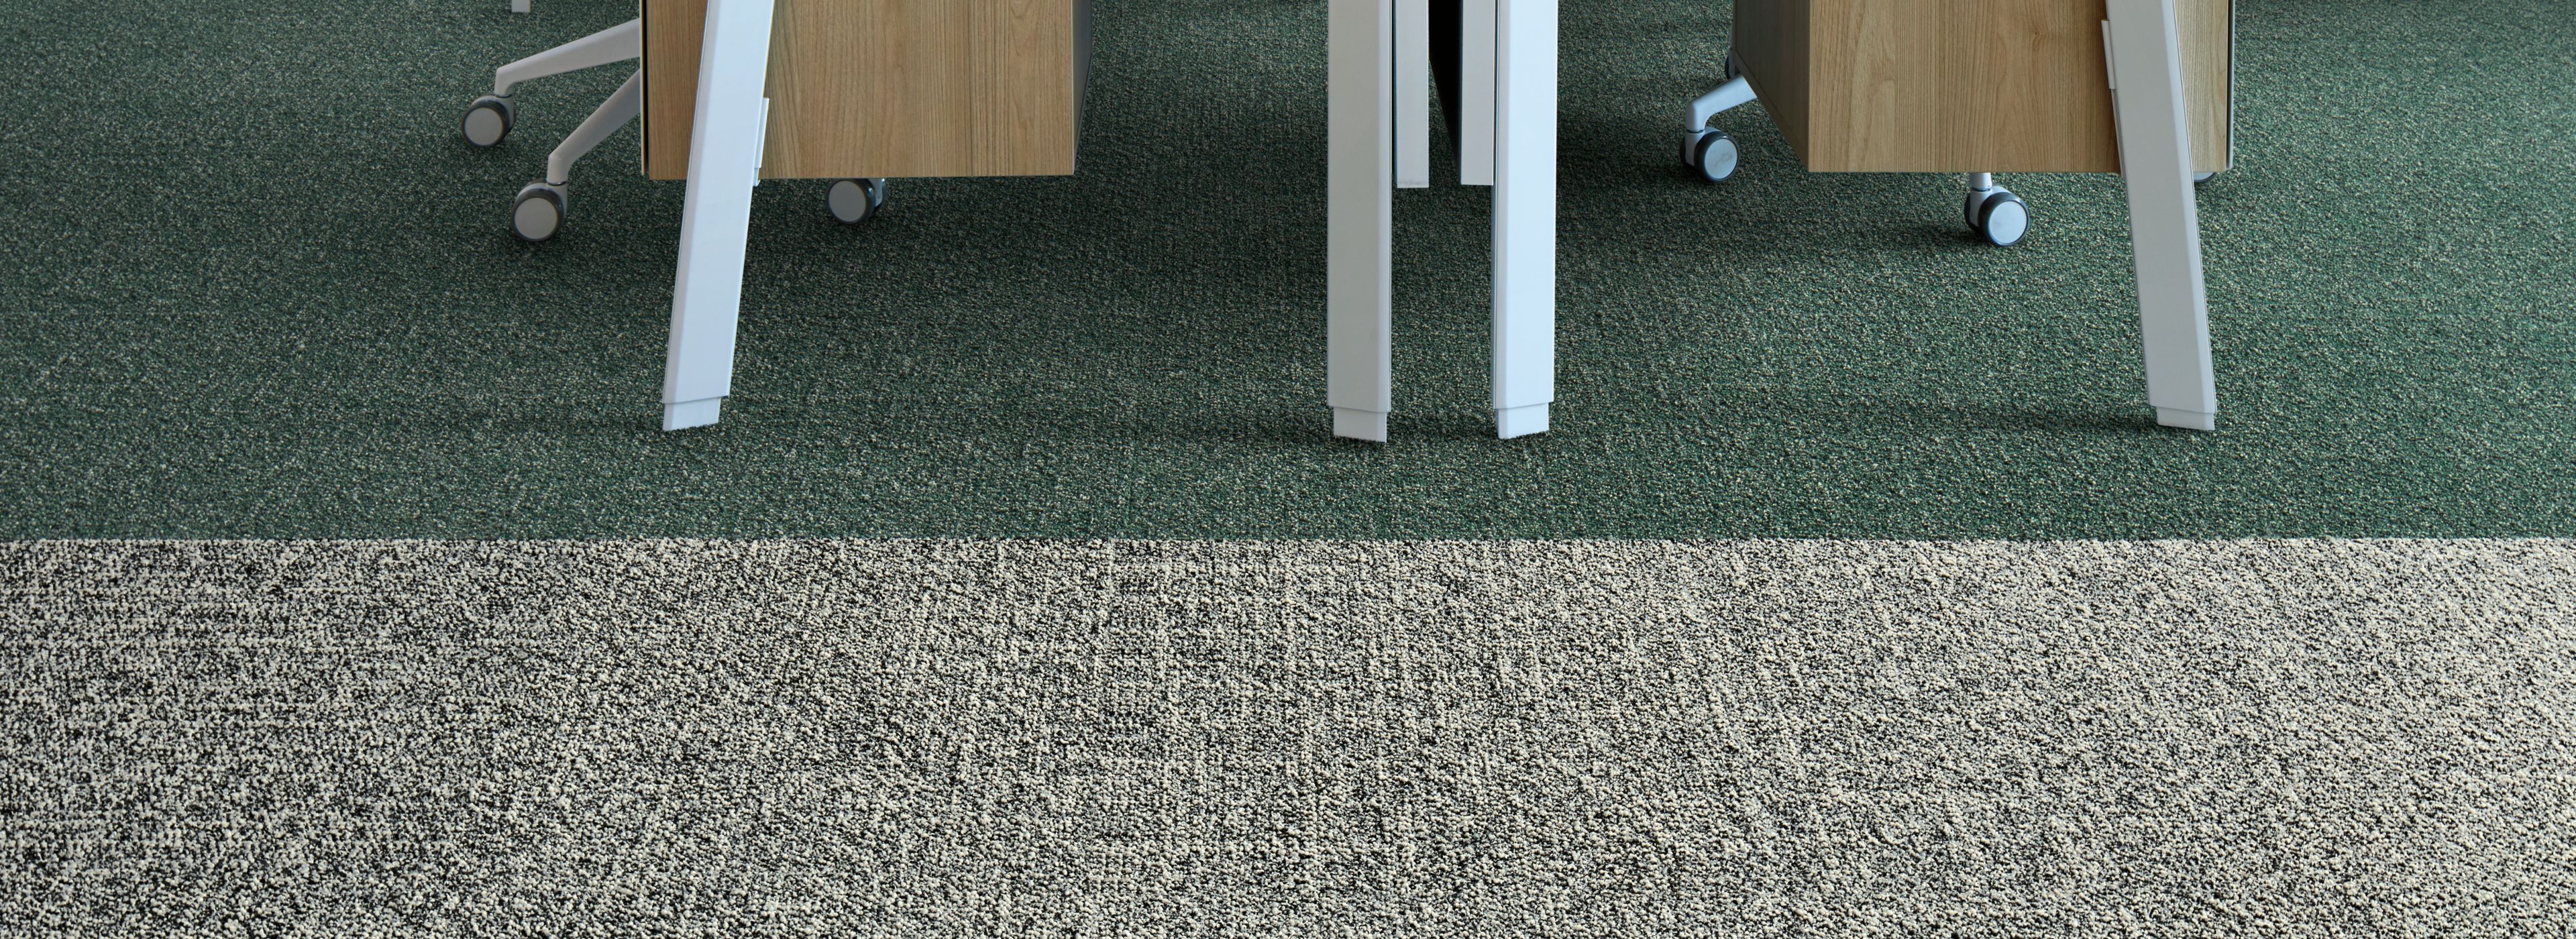 Interface Heart Songs carpet tile in workspace with two wood desks and chairs image number 1